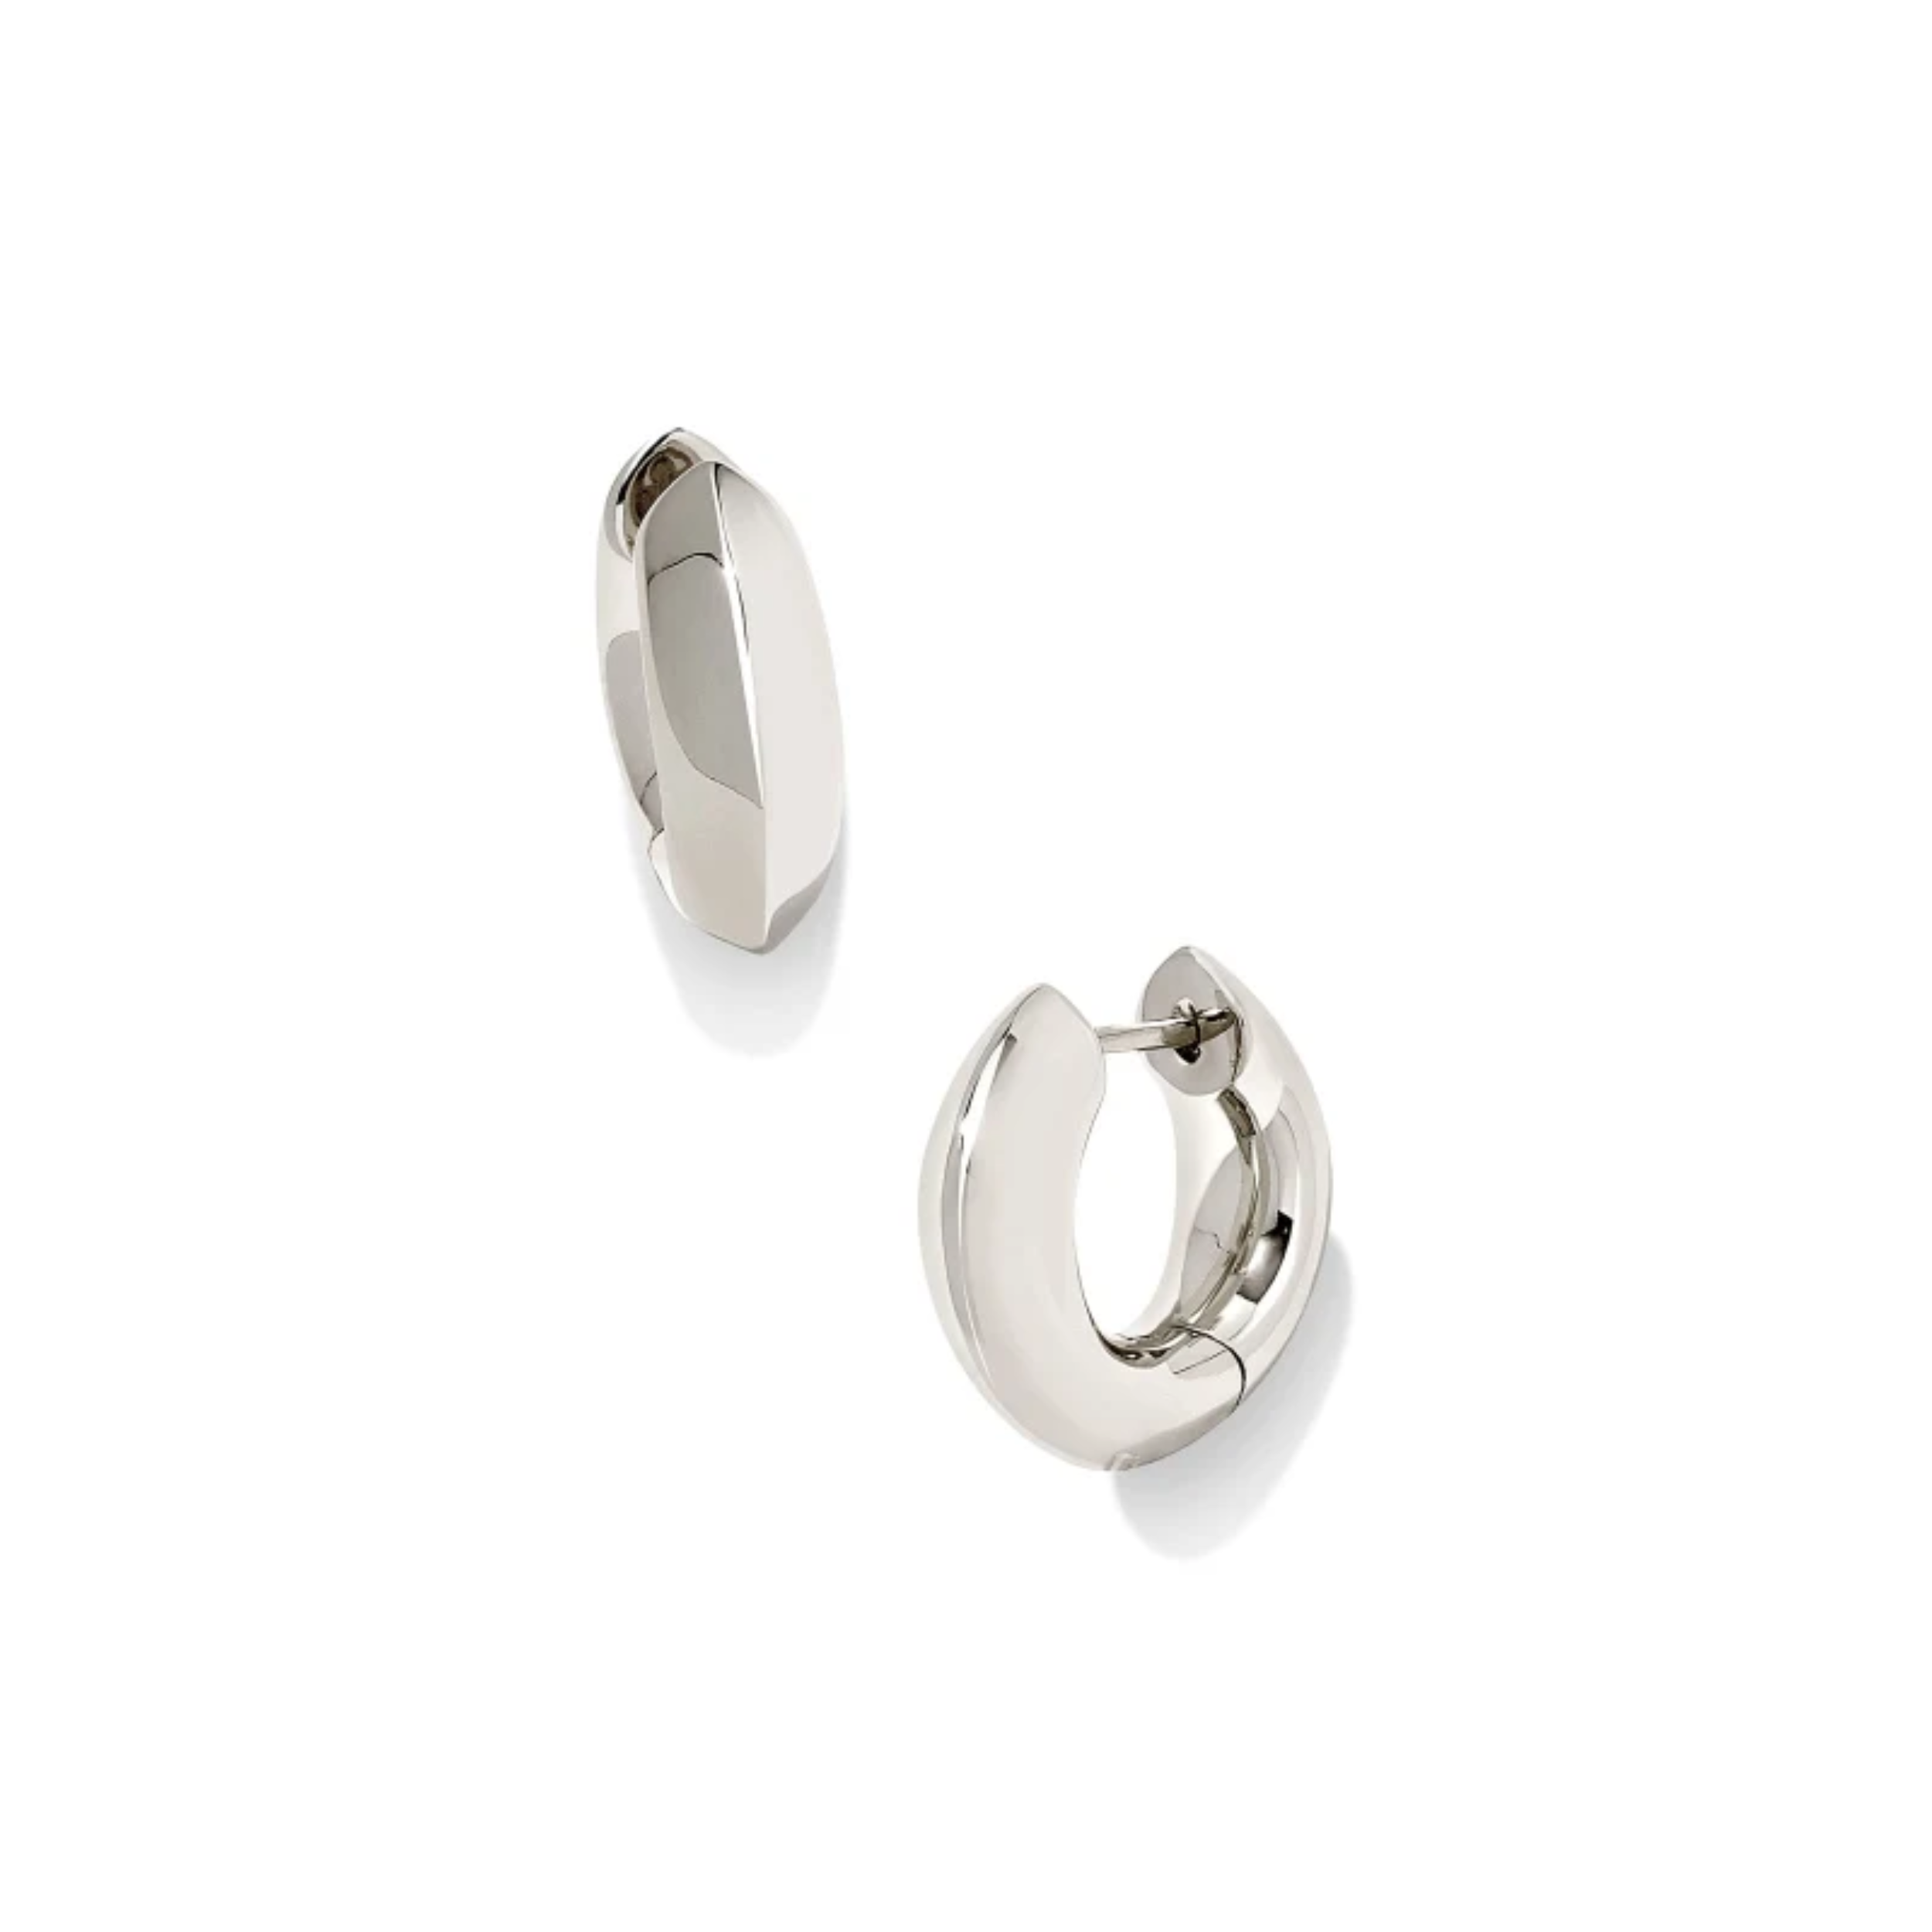 These Mikki Metal Huggie Earrings in Silver by Kendra Scott are pictured on a white background.